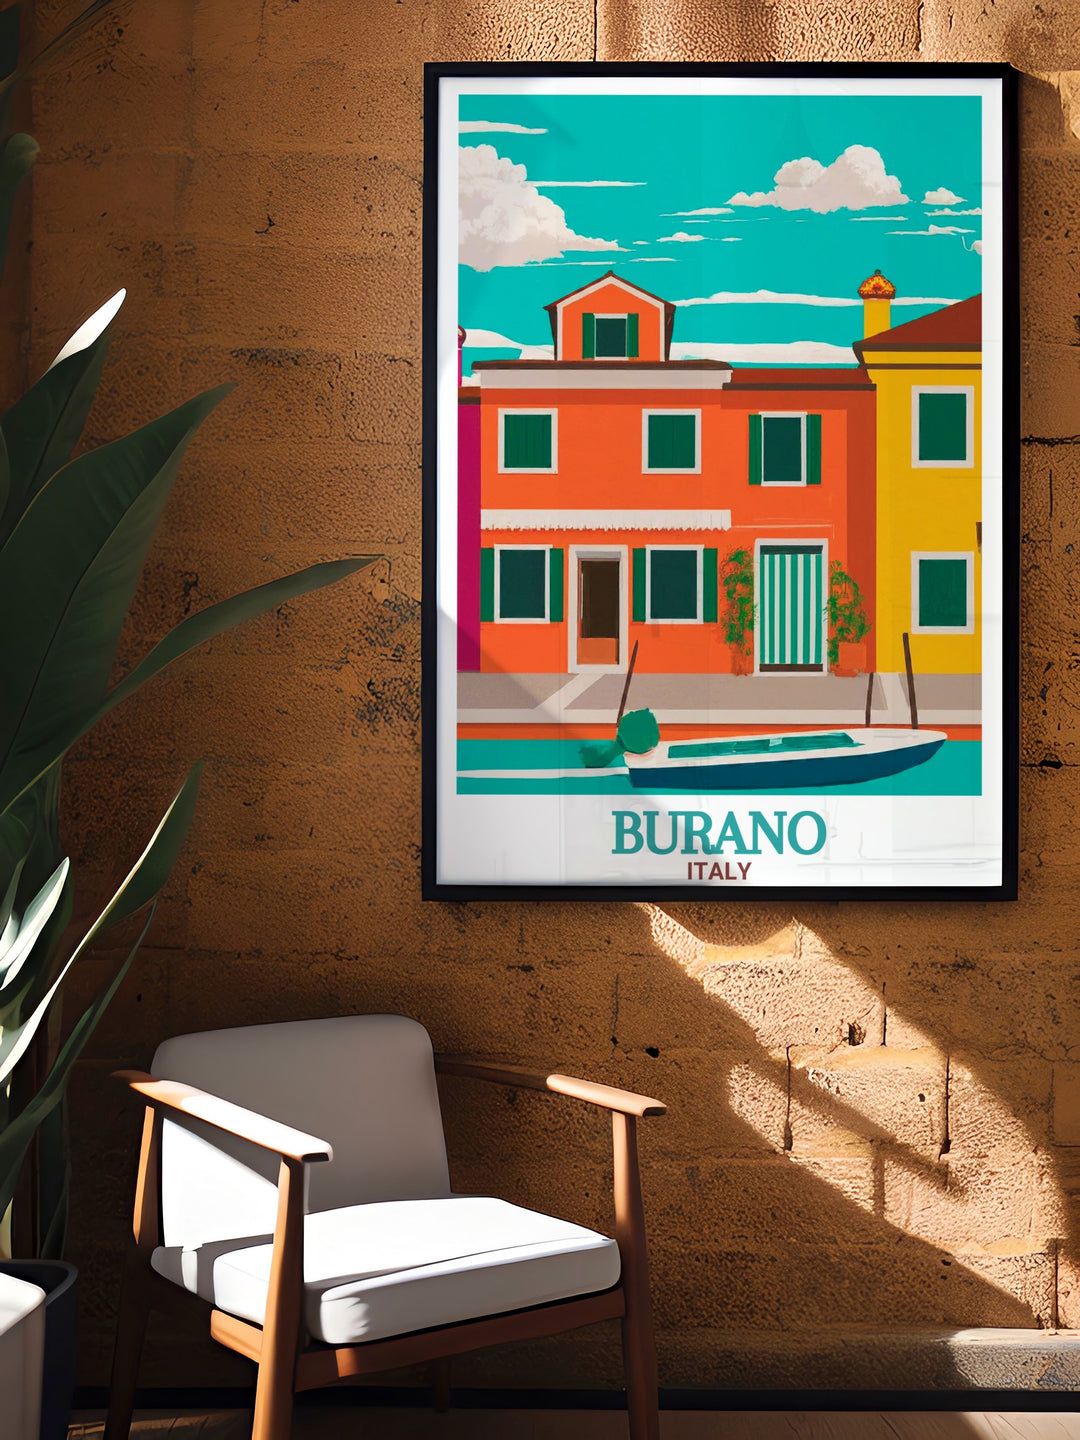 Captivating Burano Travel Poster showcasing the colorful houses and picturesque canals of Burano. This print is perfect for adding a touch of travel inspired decor to your home, evoking memories of Italy.